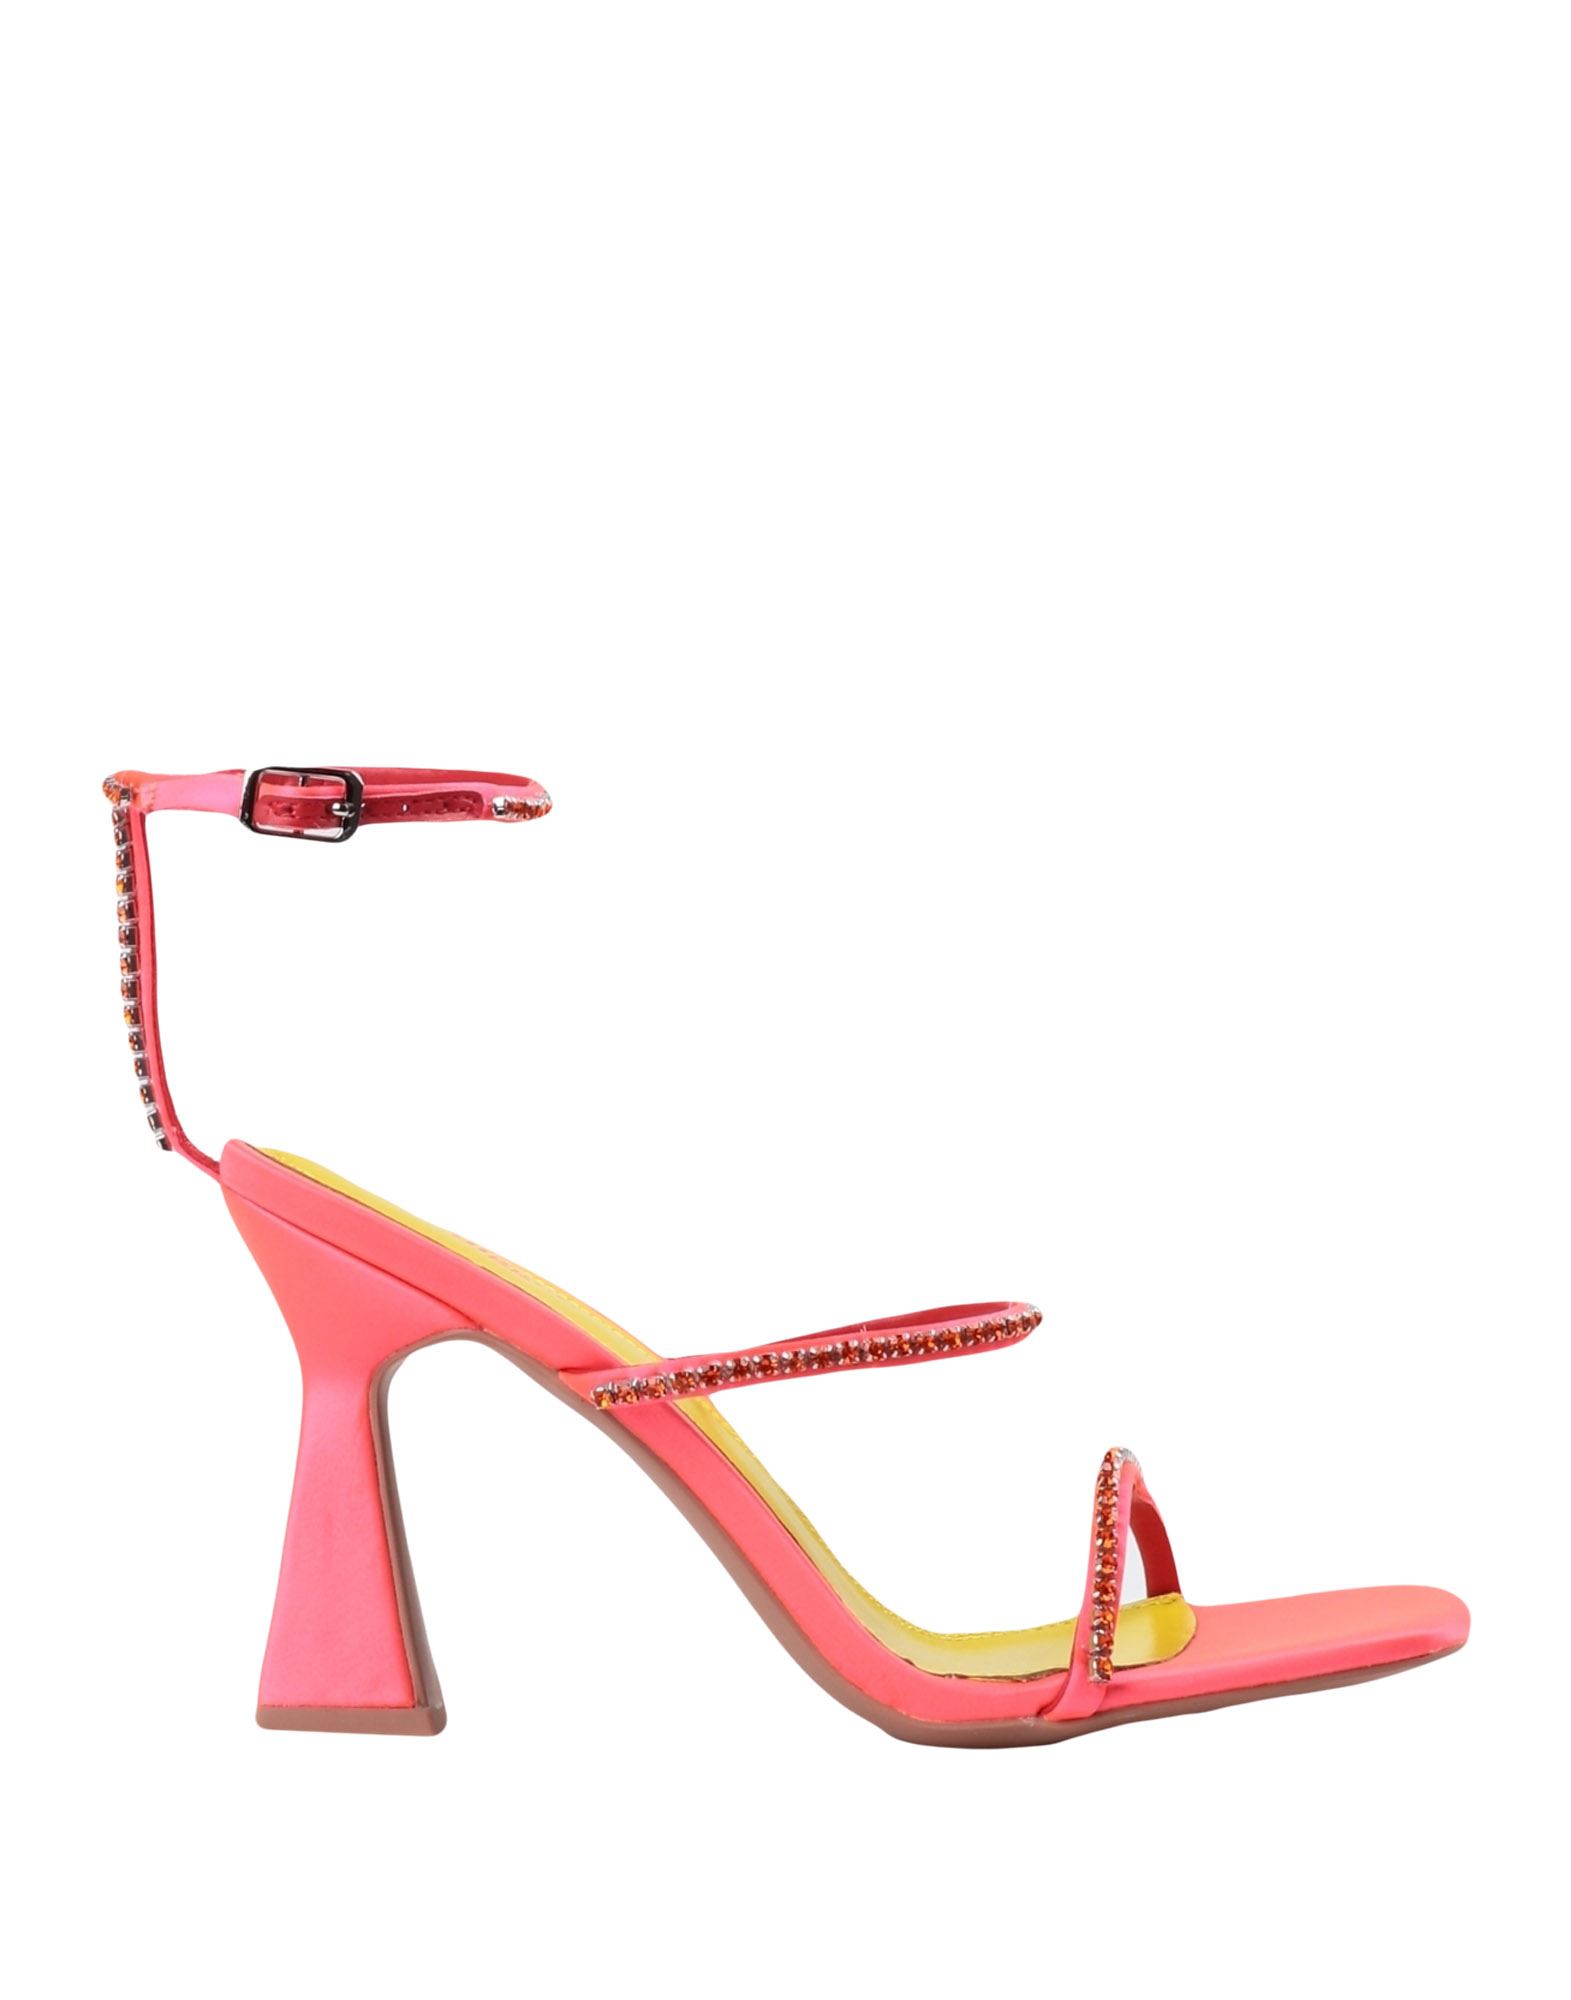 The Goal Digger Sandals In Red | ModeSens